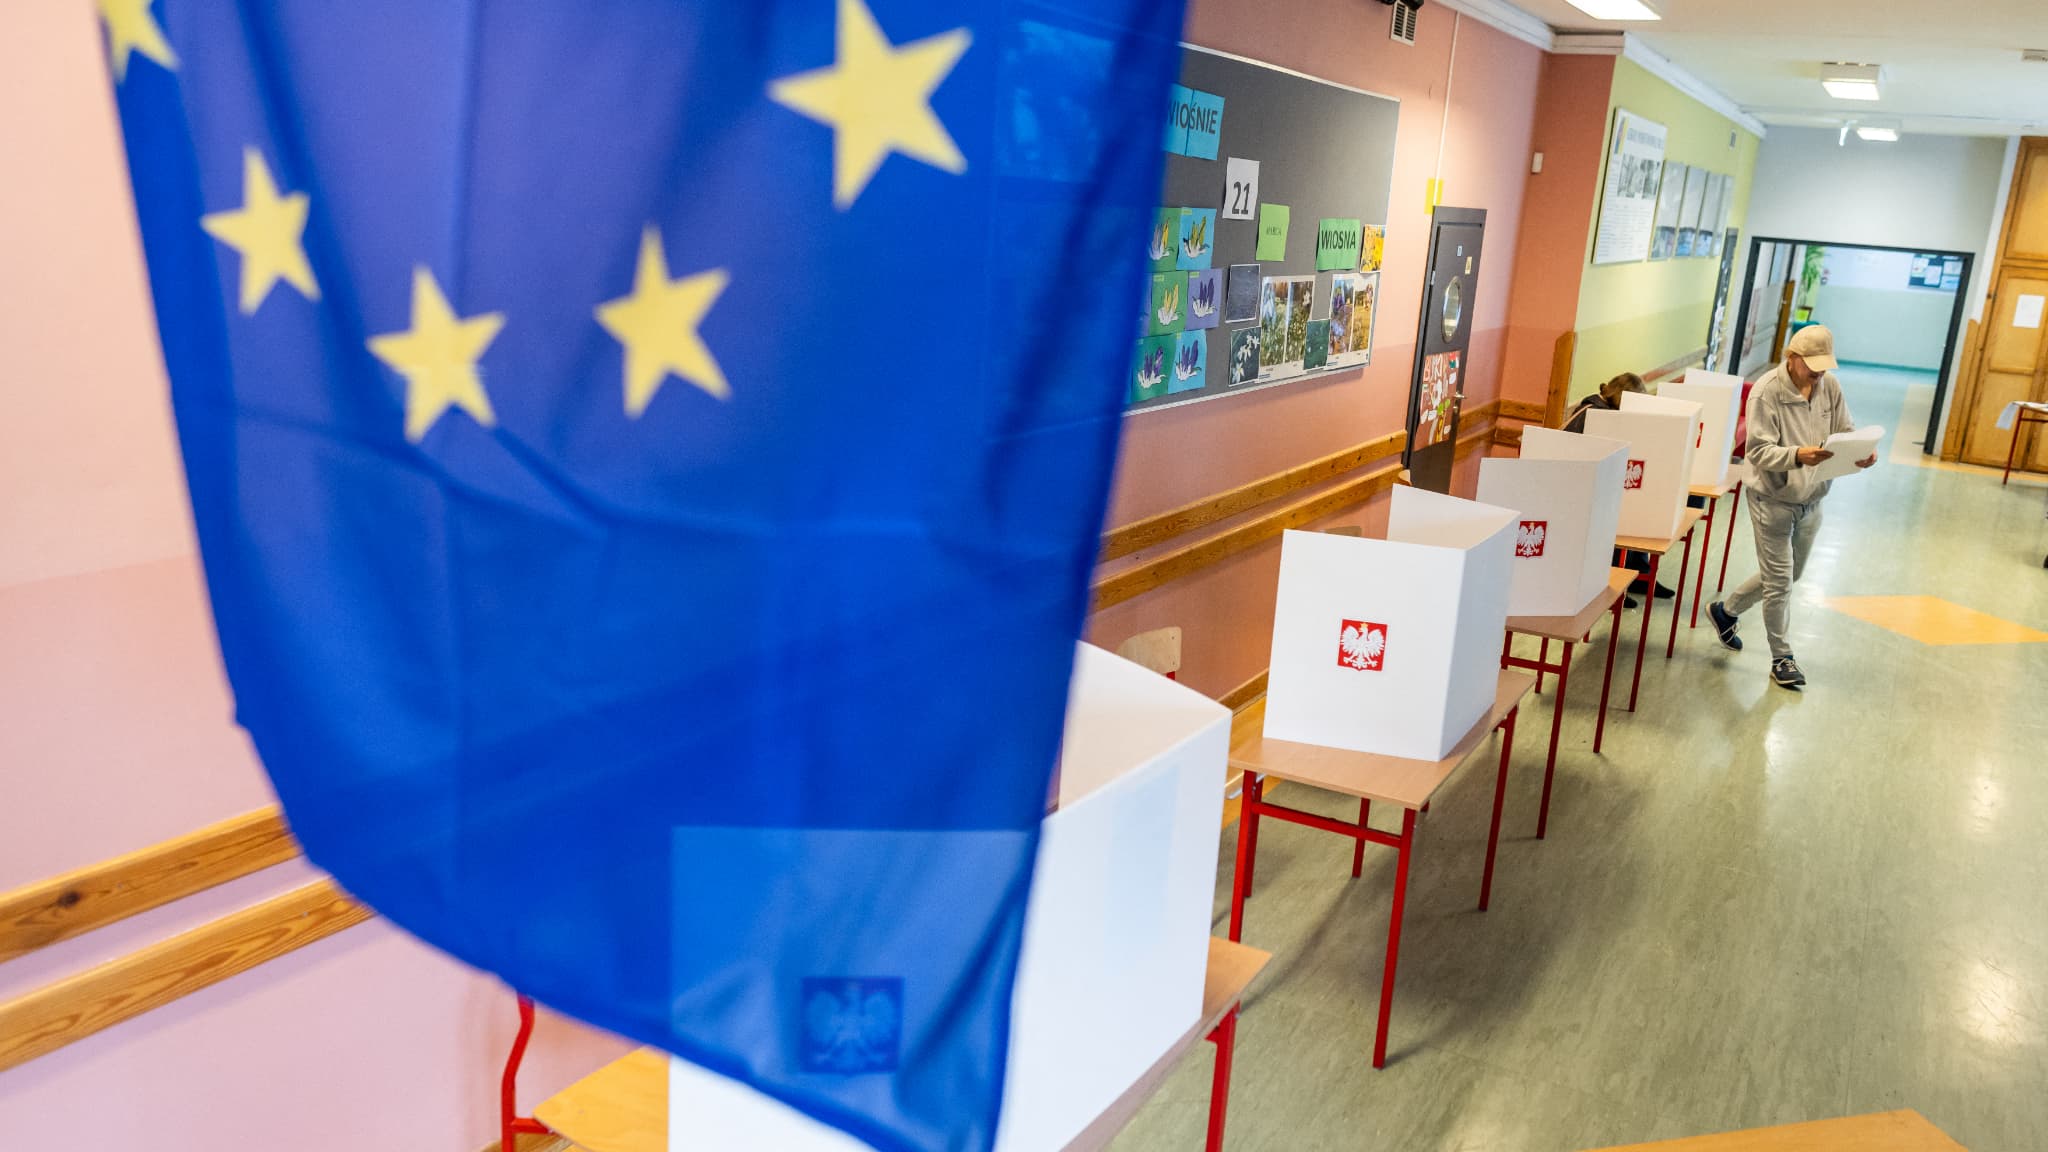 Germany, Spain, Poland… what other EU countries voted for